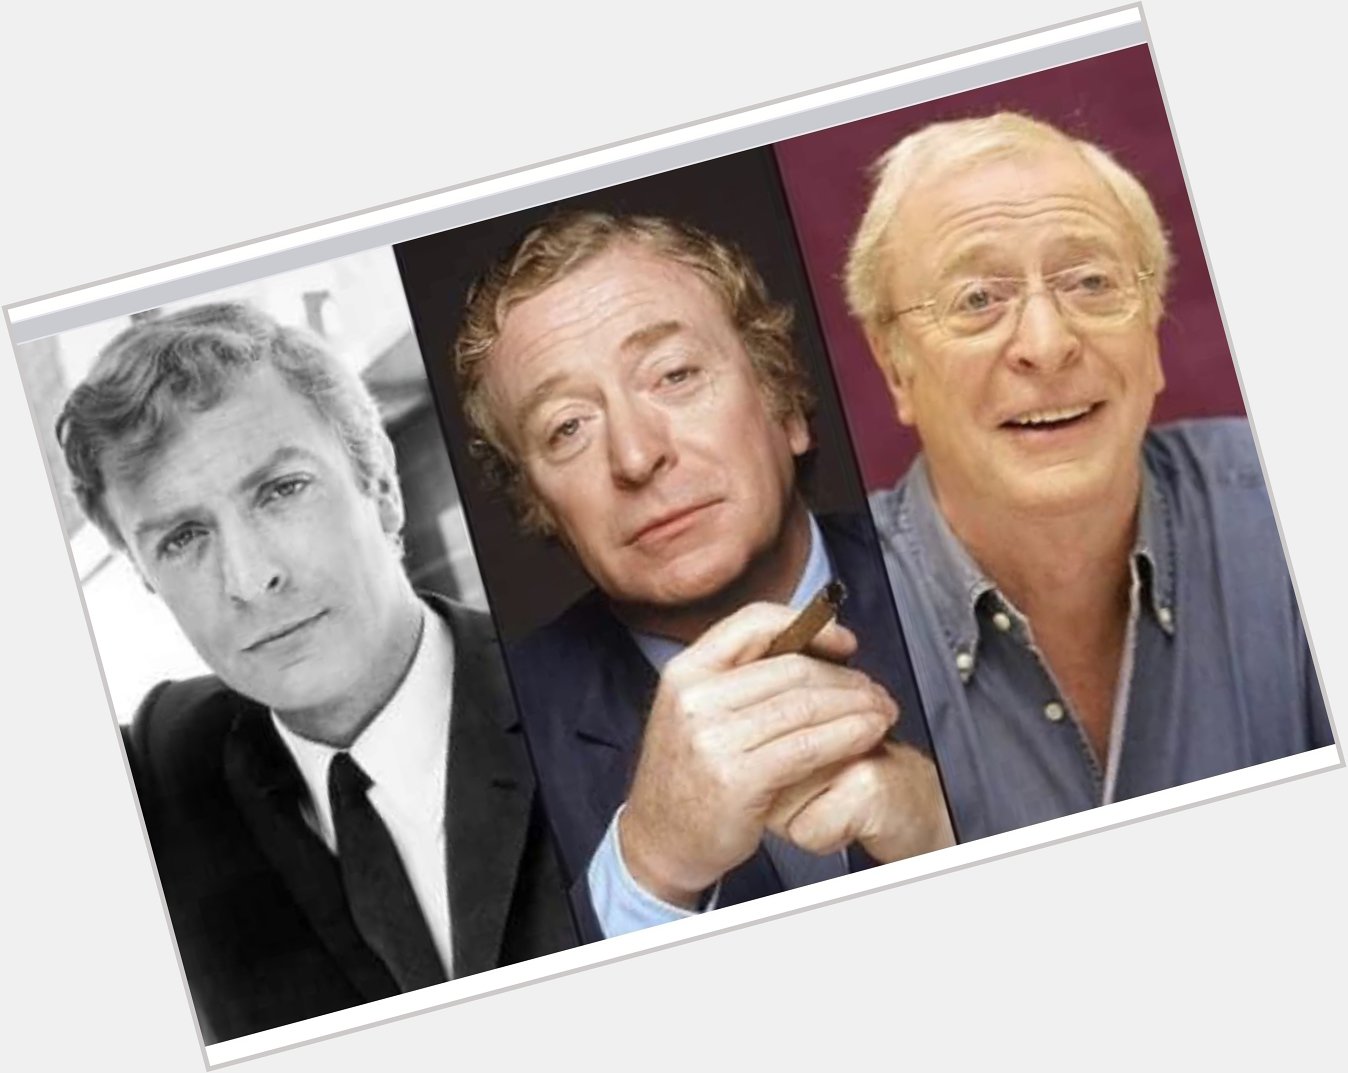 A very happy birthday to Sir Michael Caine 89 today
Sir Michael Caine CBE 